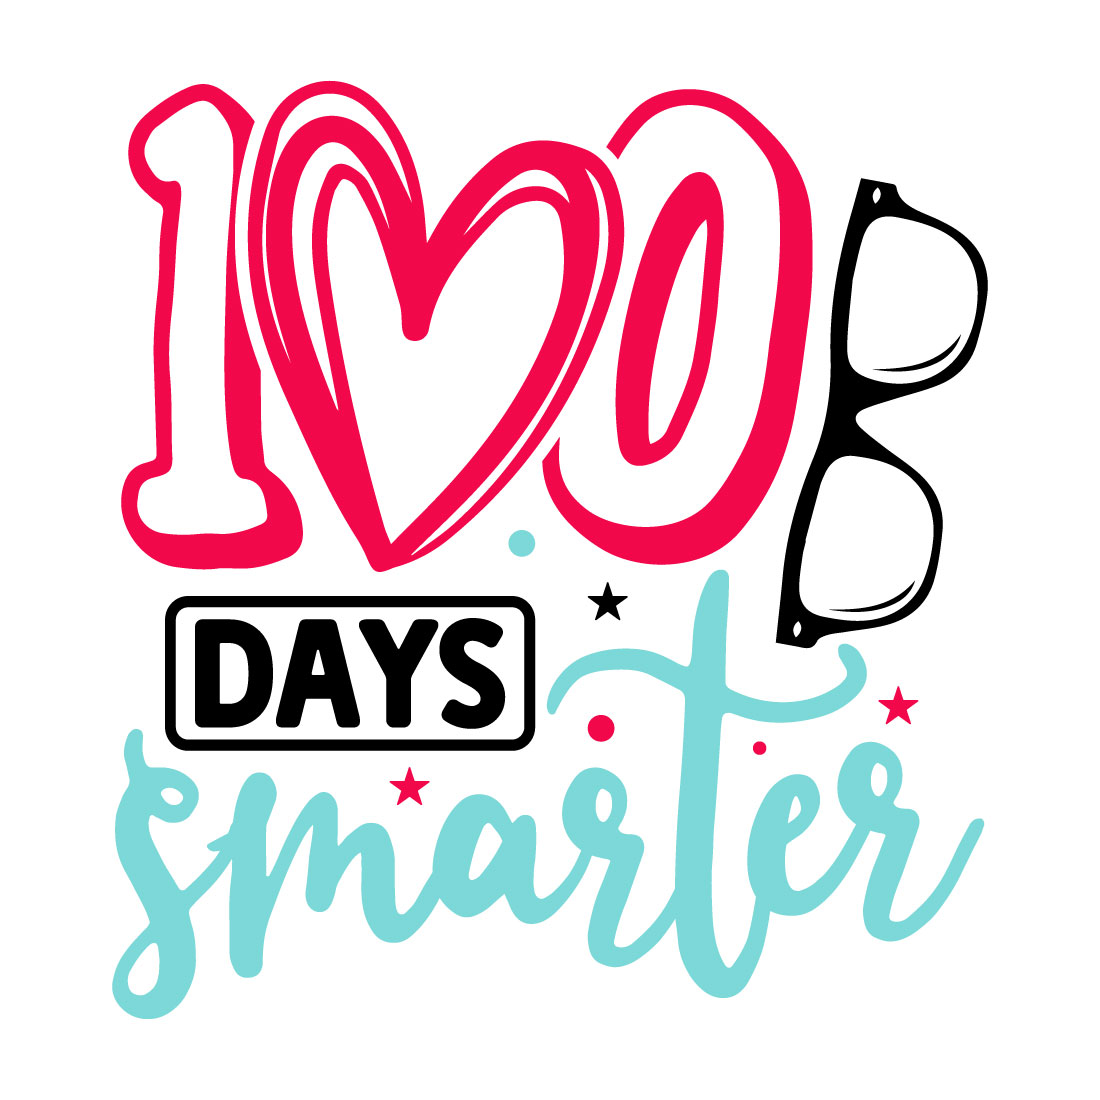 Image for prints with irresistible inscription 100 Days Smarter